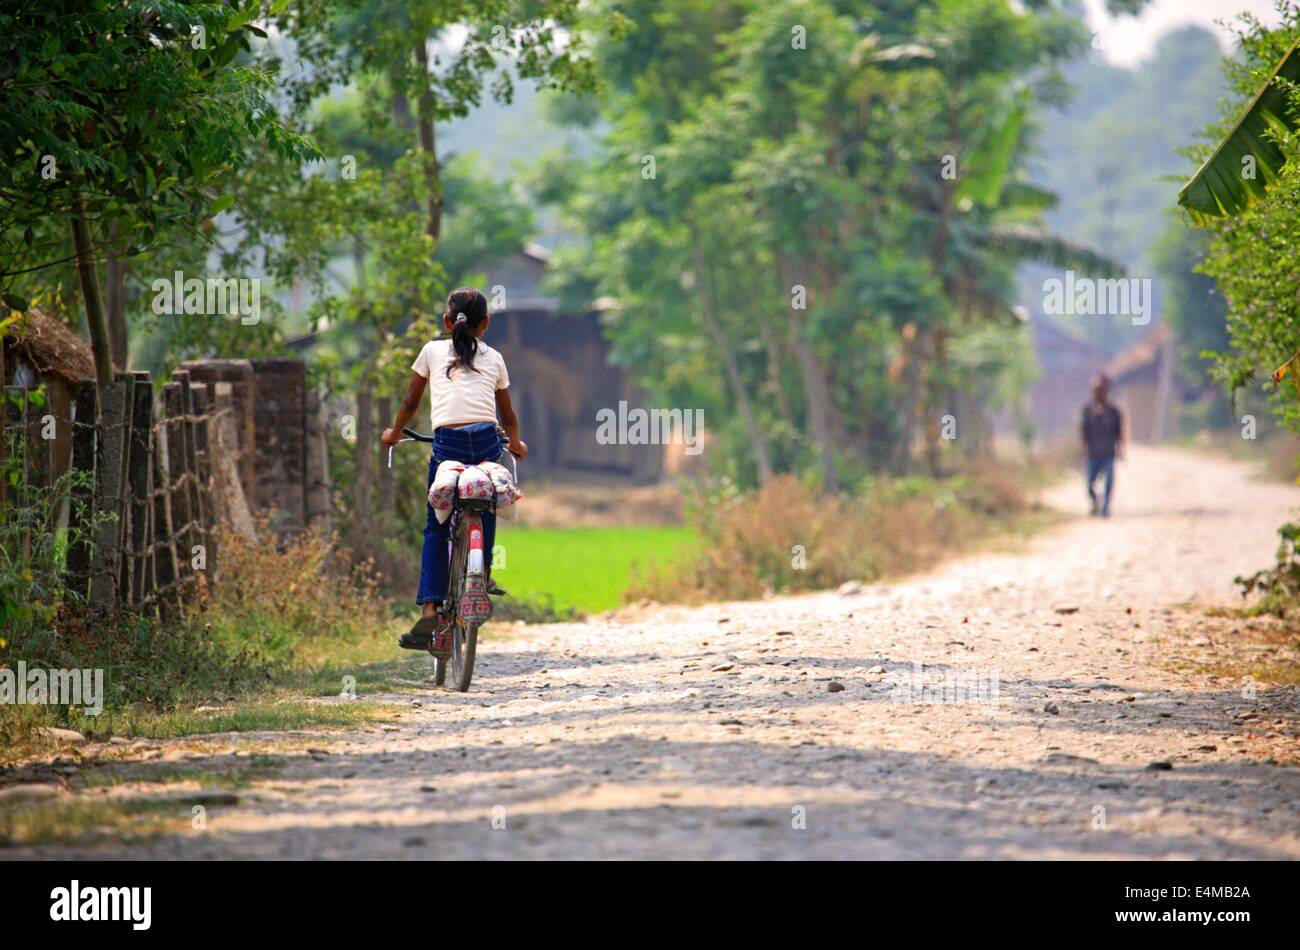 A girl rides in a bike in a rural village in Nepal Stock Photo